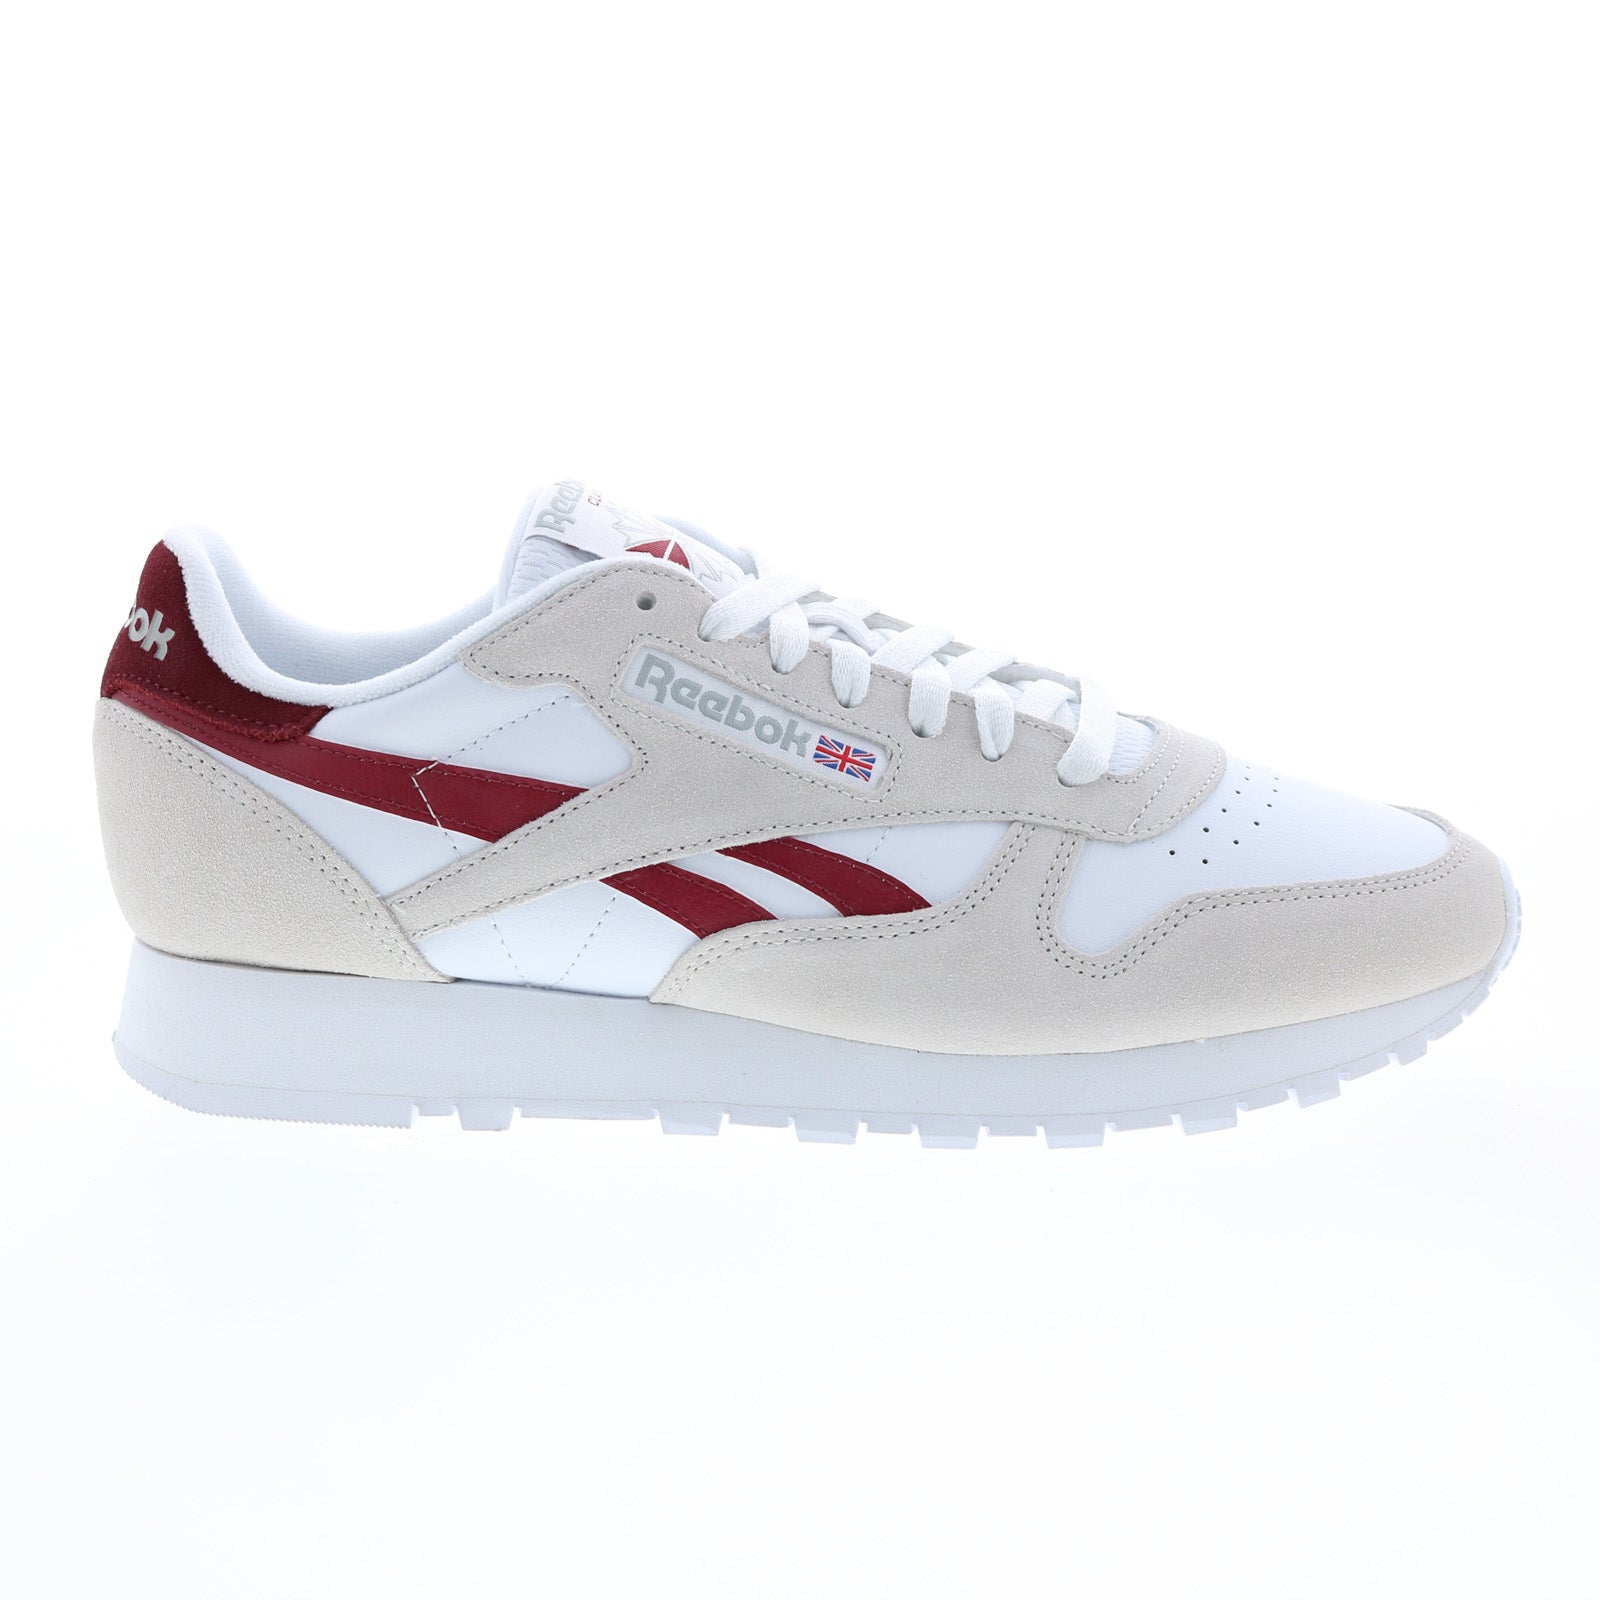 bank teksten Lang Reebok Classic Leather GY7301 Mens White Suede Lifestyle Sneakers Shoe -  Ruze Shoes